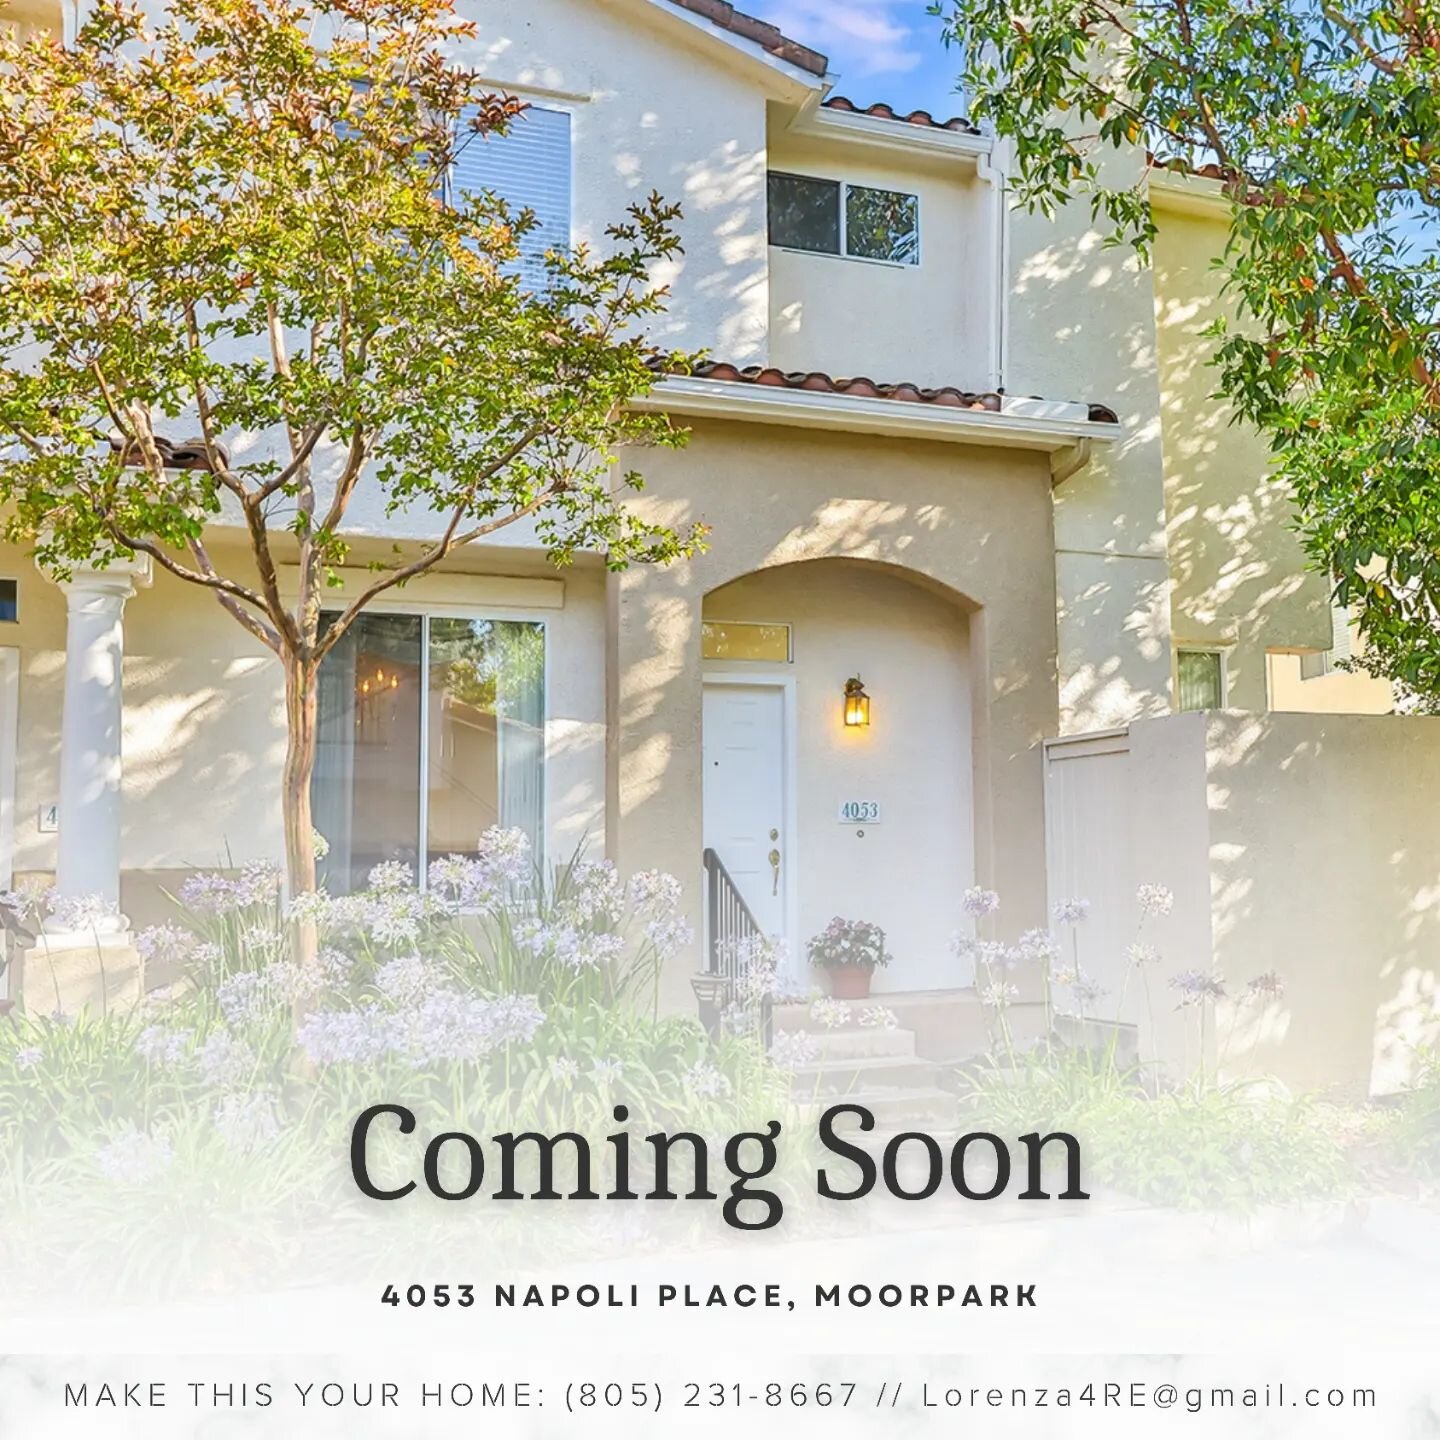 🏠 COMING SOON: Welcome to the Villagio neighborhood!

Nestled in a quiet, family-friendly community, this stunning townhome is about to hit the market! 😍 CALL US today to find out all the details and set up YOUR PRIVATE SHOWING! You do not wan to m